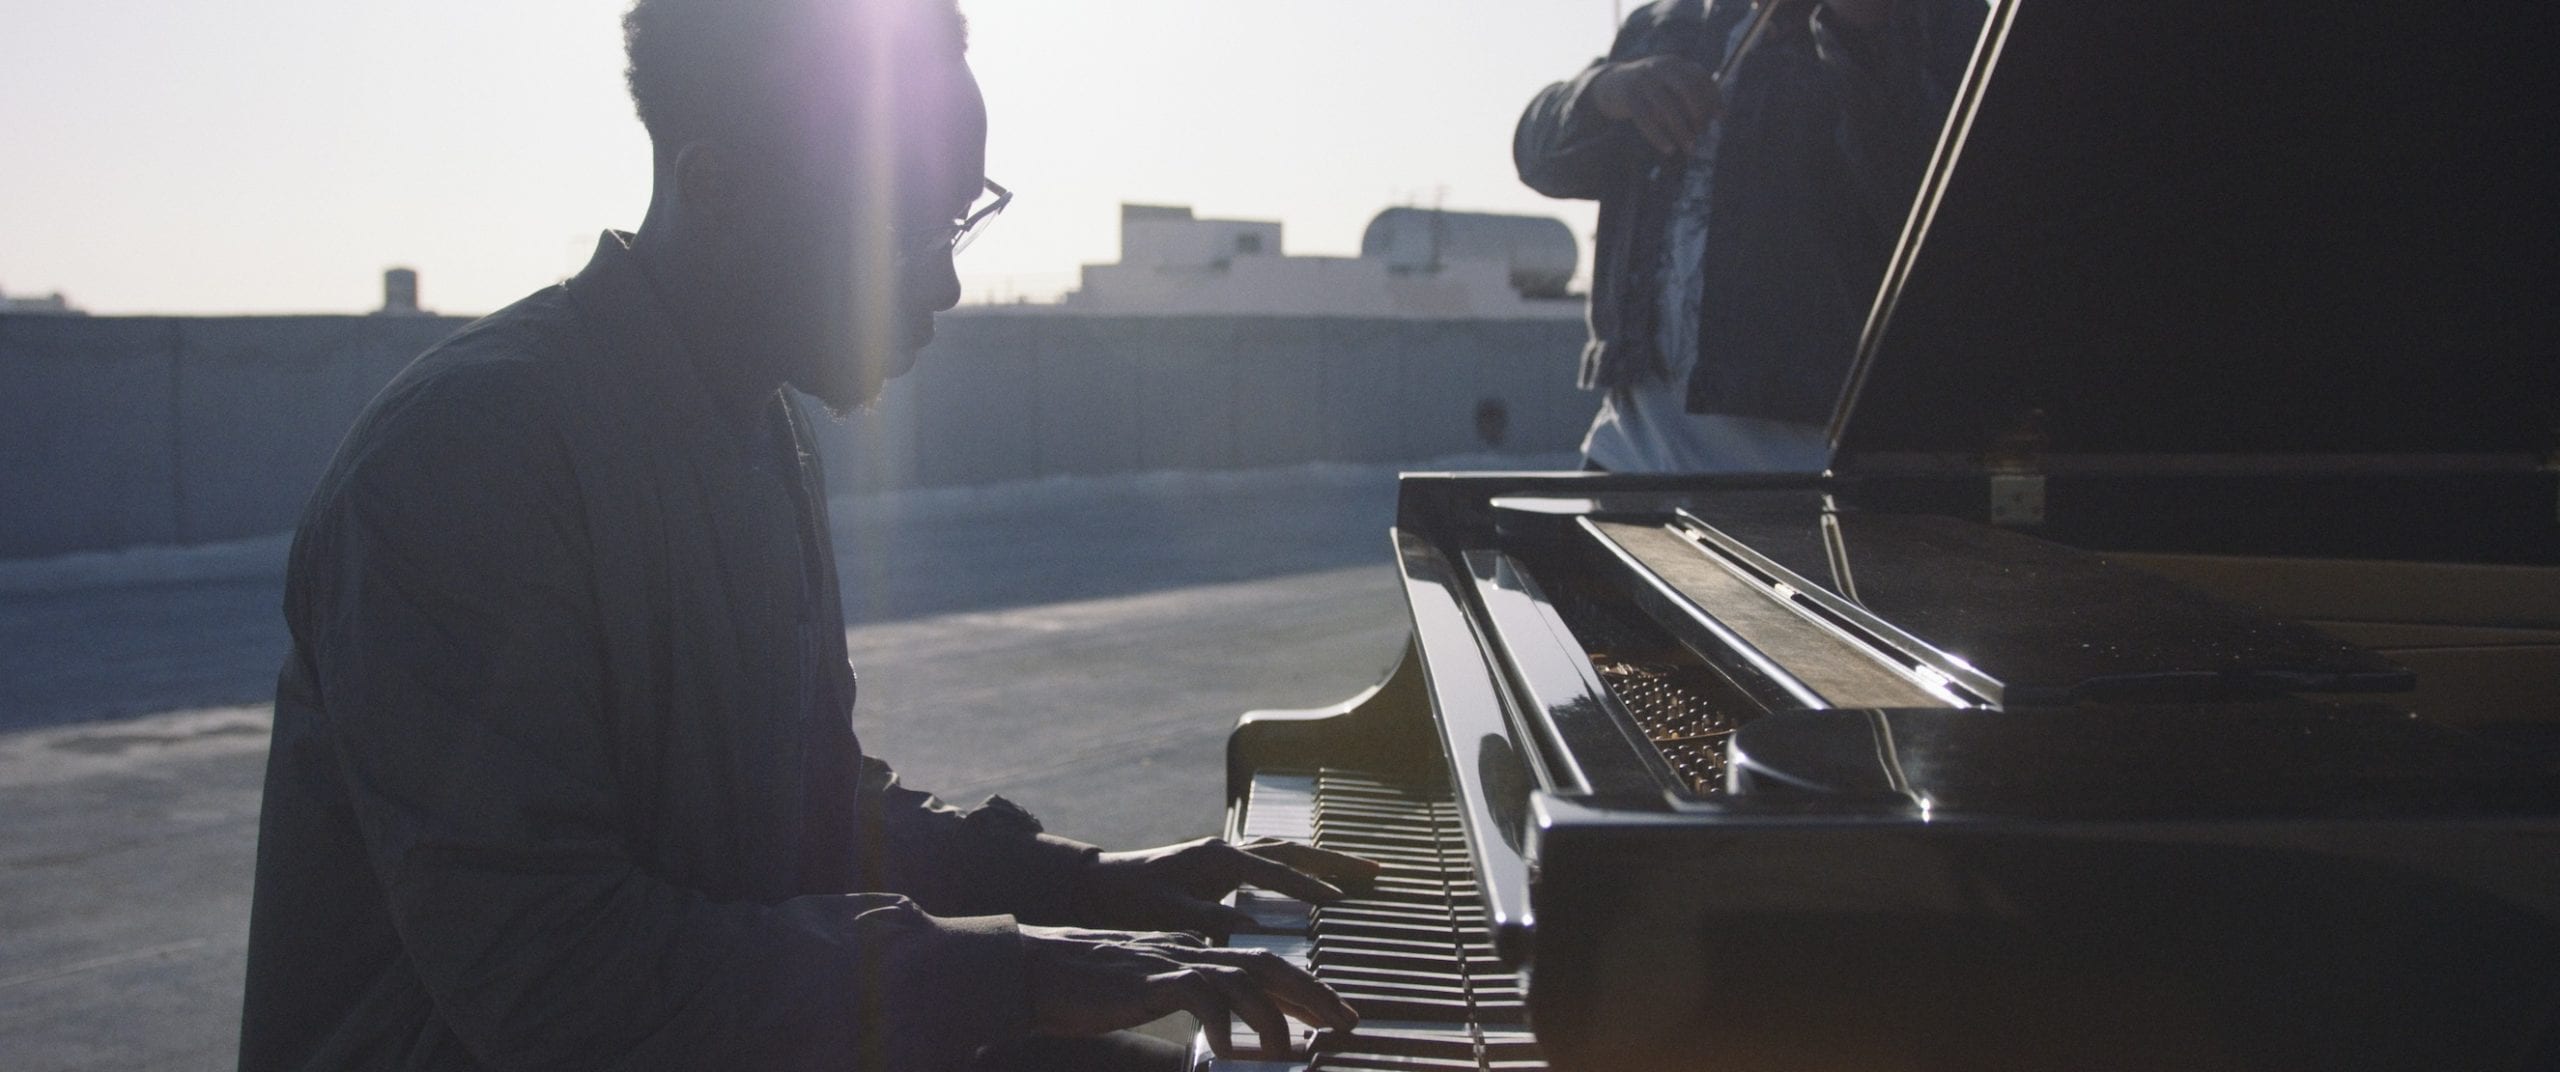 Black Violin One Step Music Video Side profile of a man wearing glasses playing a piano on a concrete rooftop